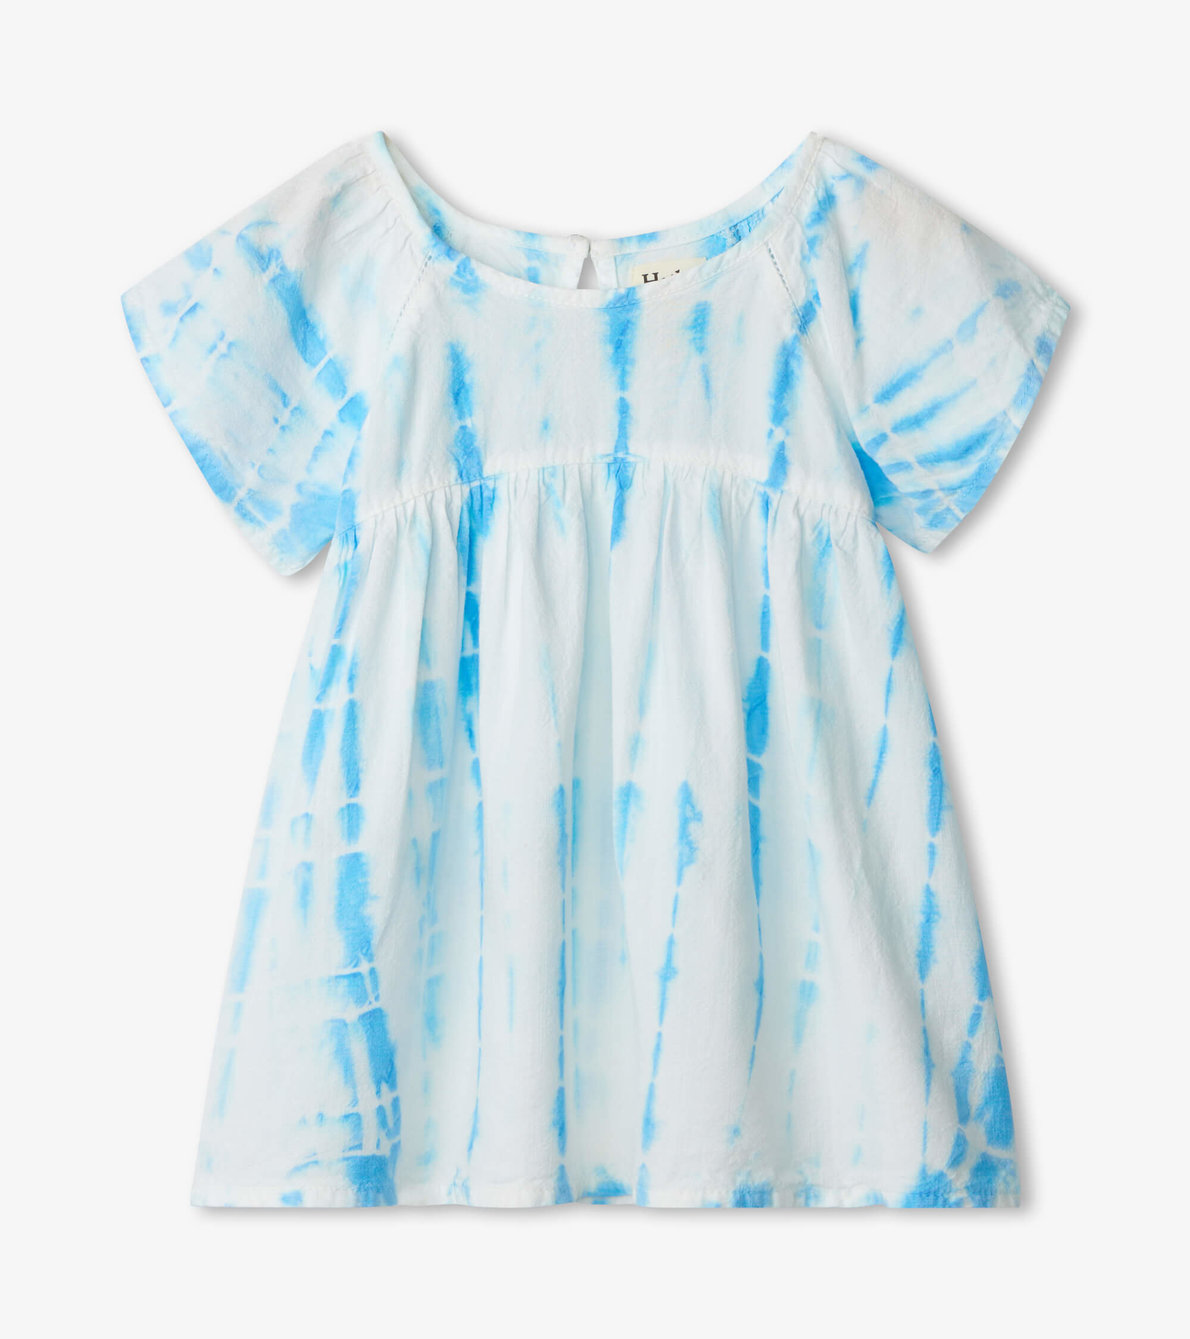 View larger image of Blue Tie Dye Stripes Baby Woven Dress